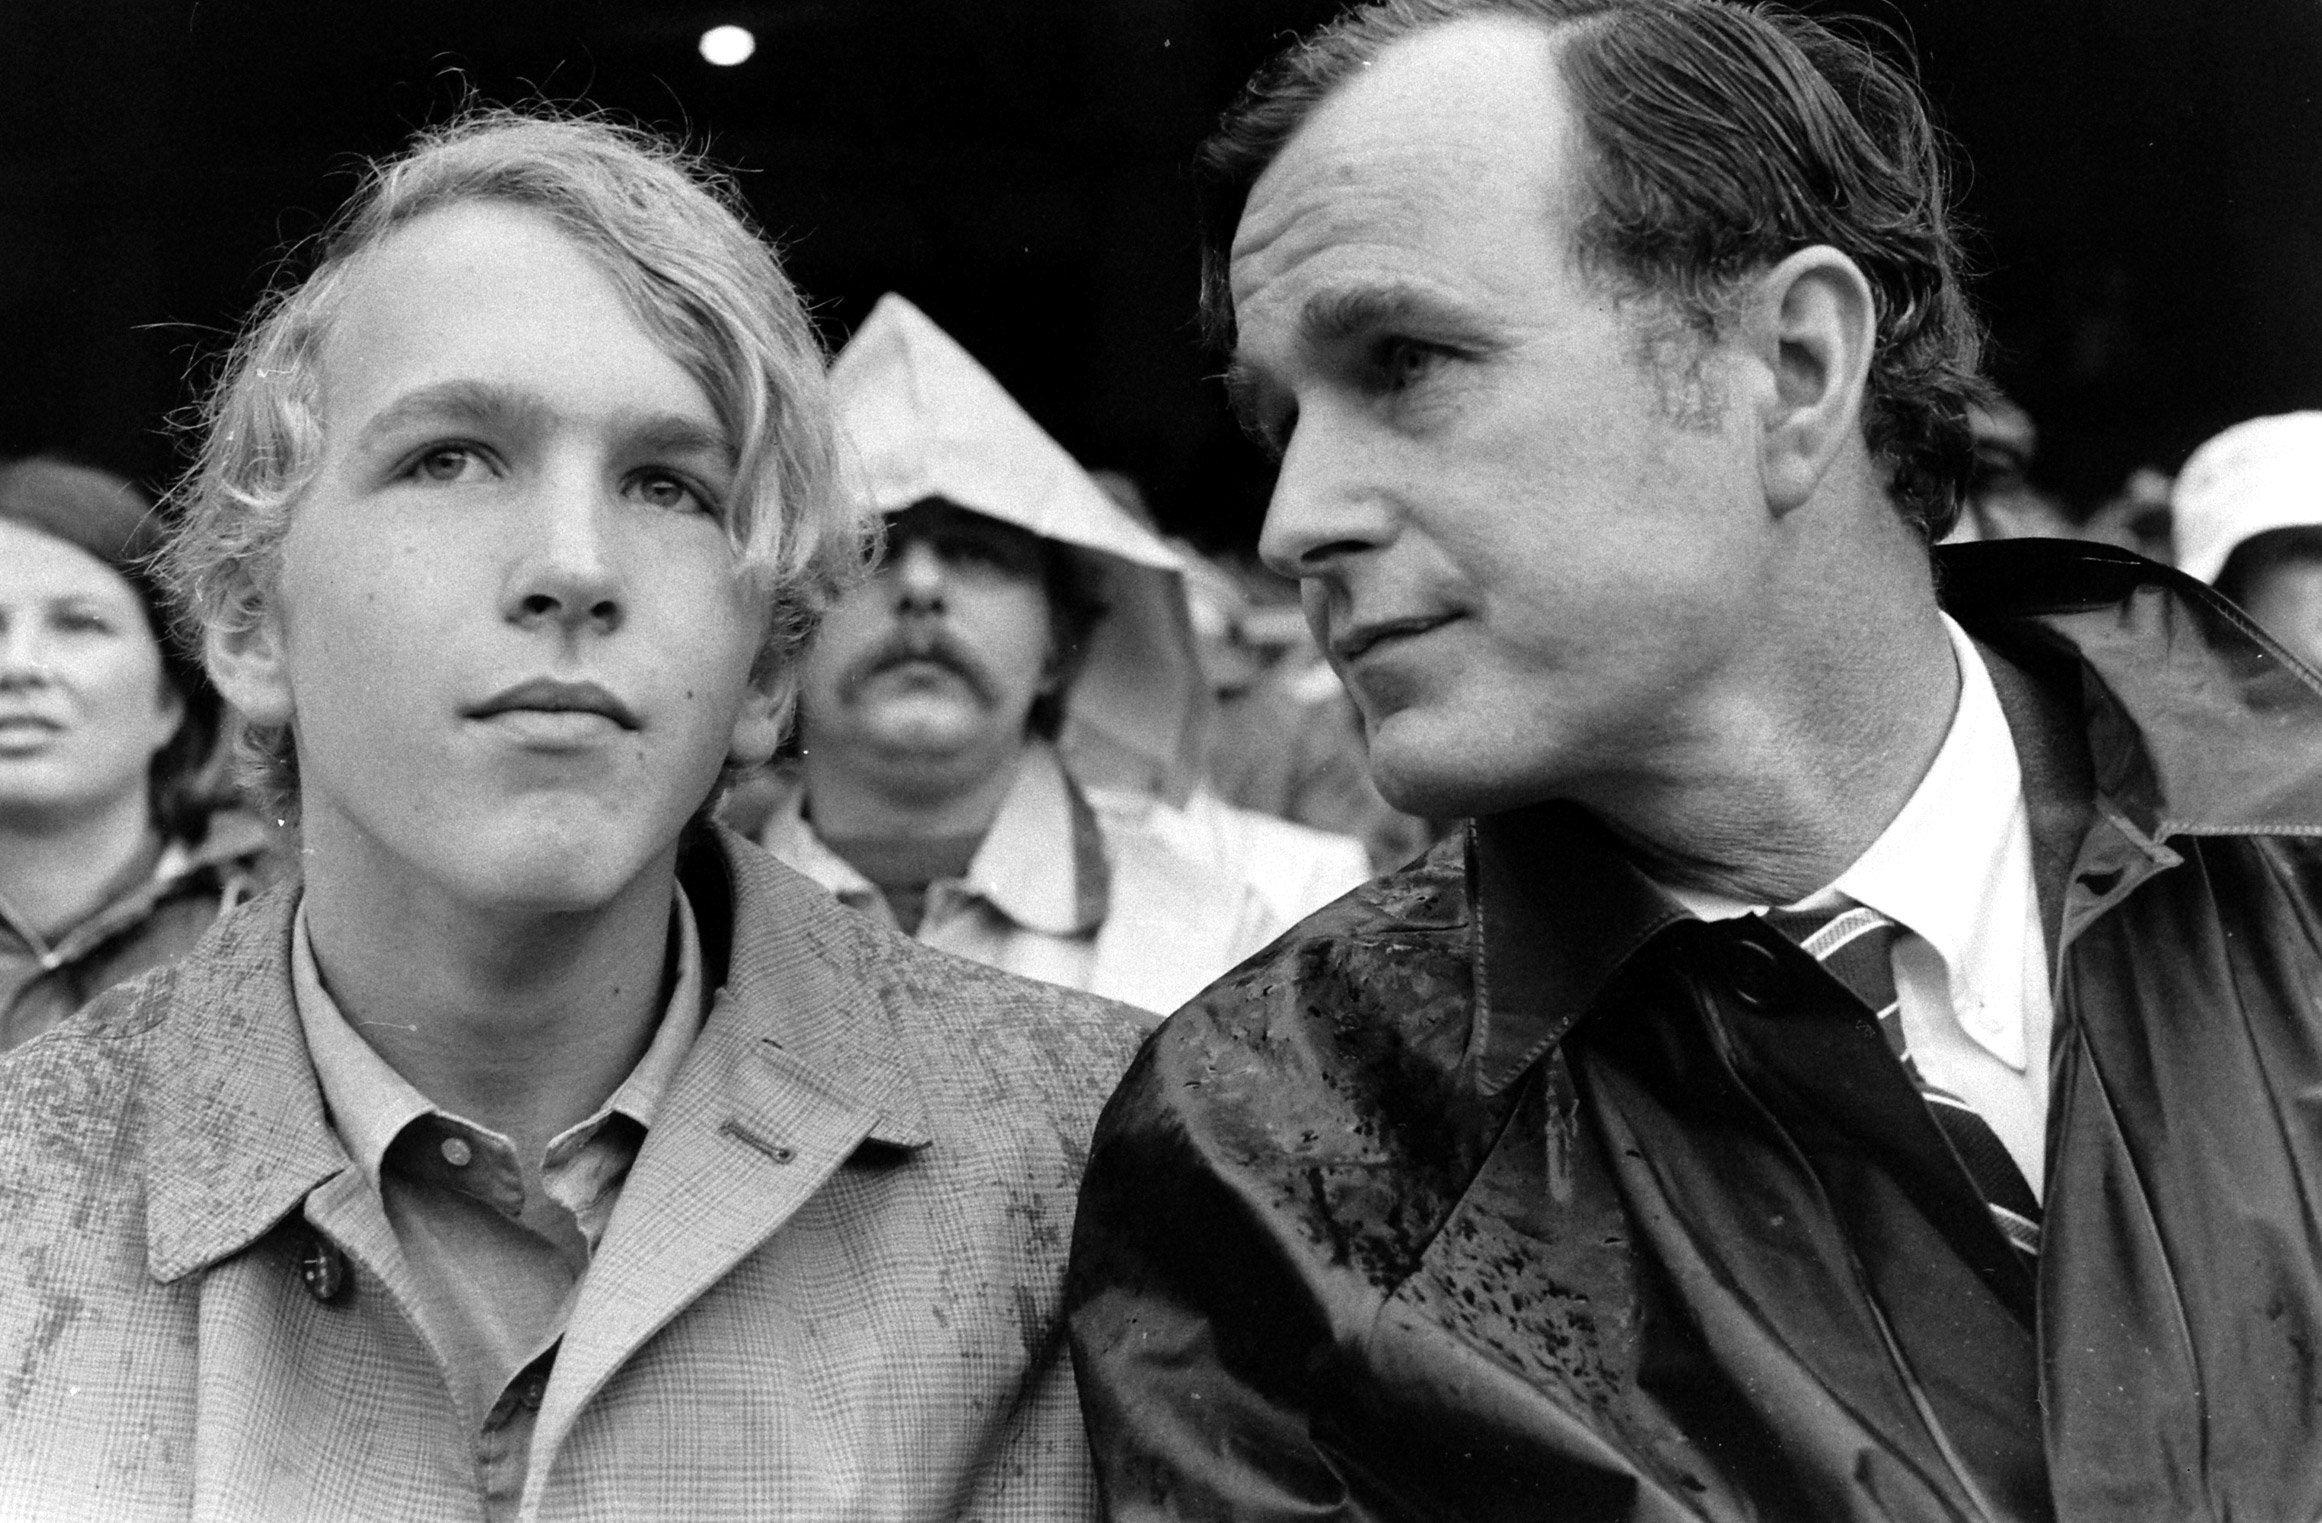 George H.W. Bush at a baseball game with son Marvin in 1971.